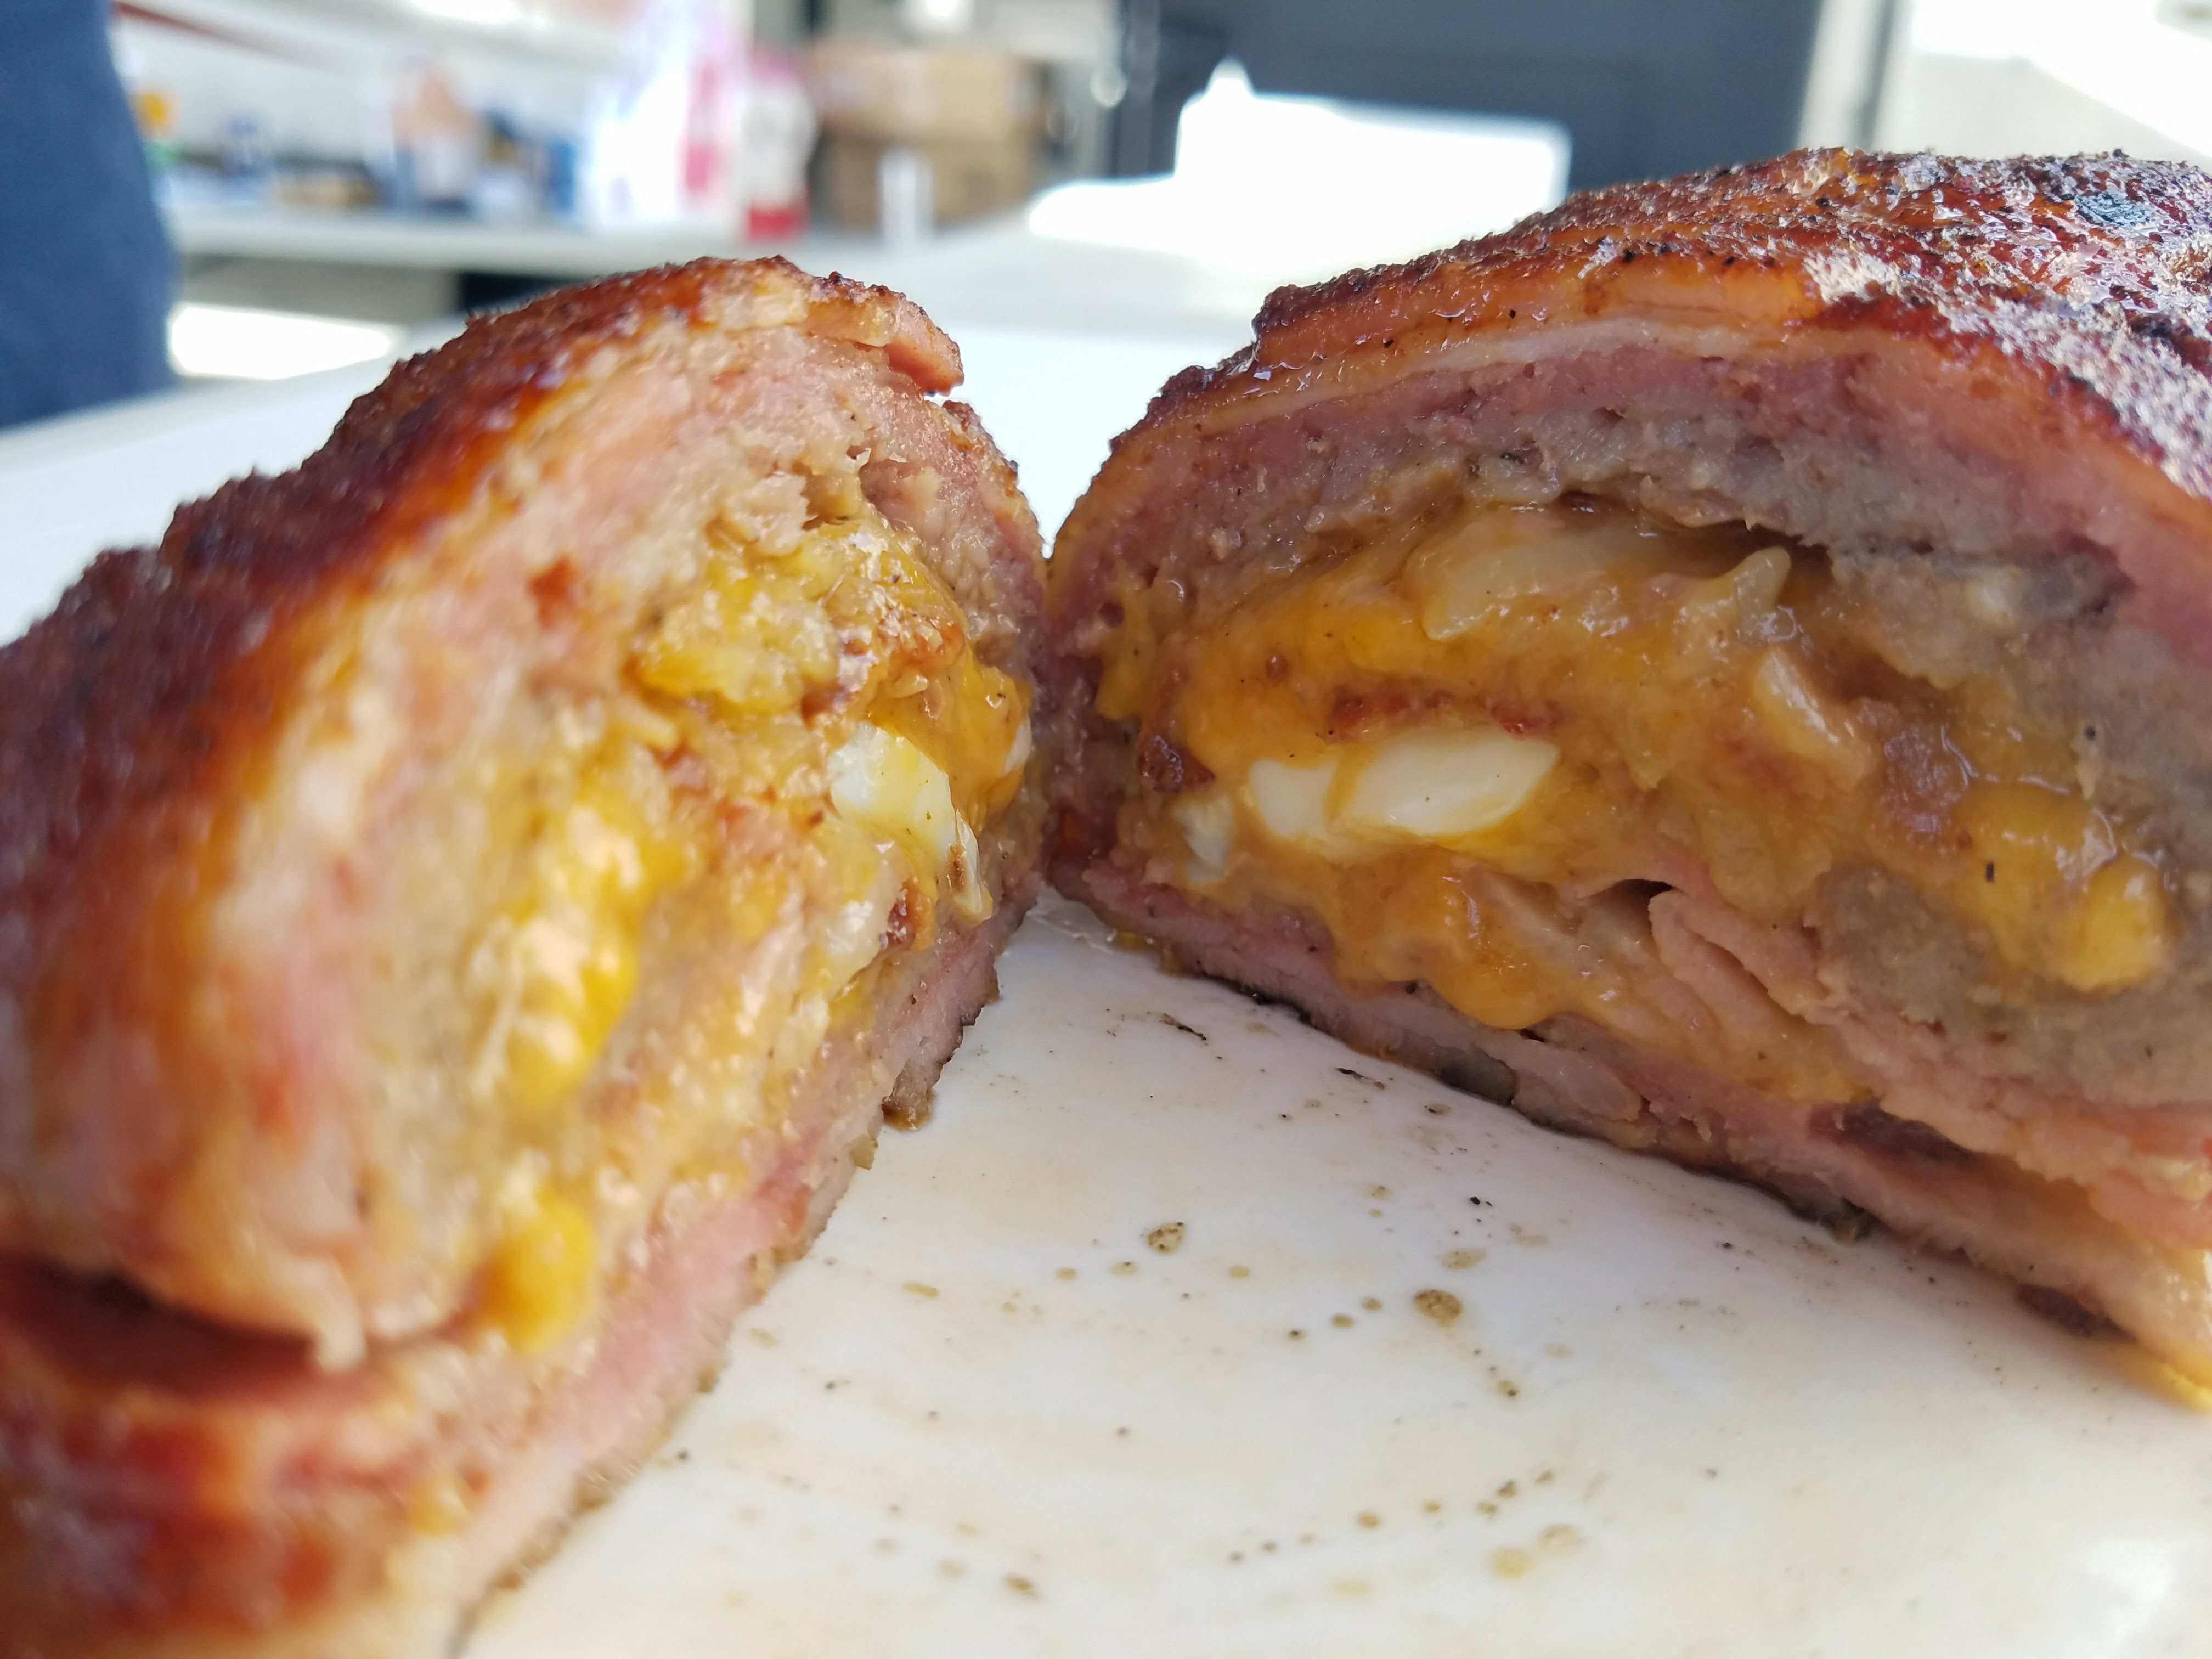 The American Royal Bacon Brunch Explosion